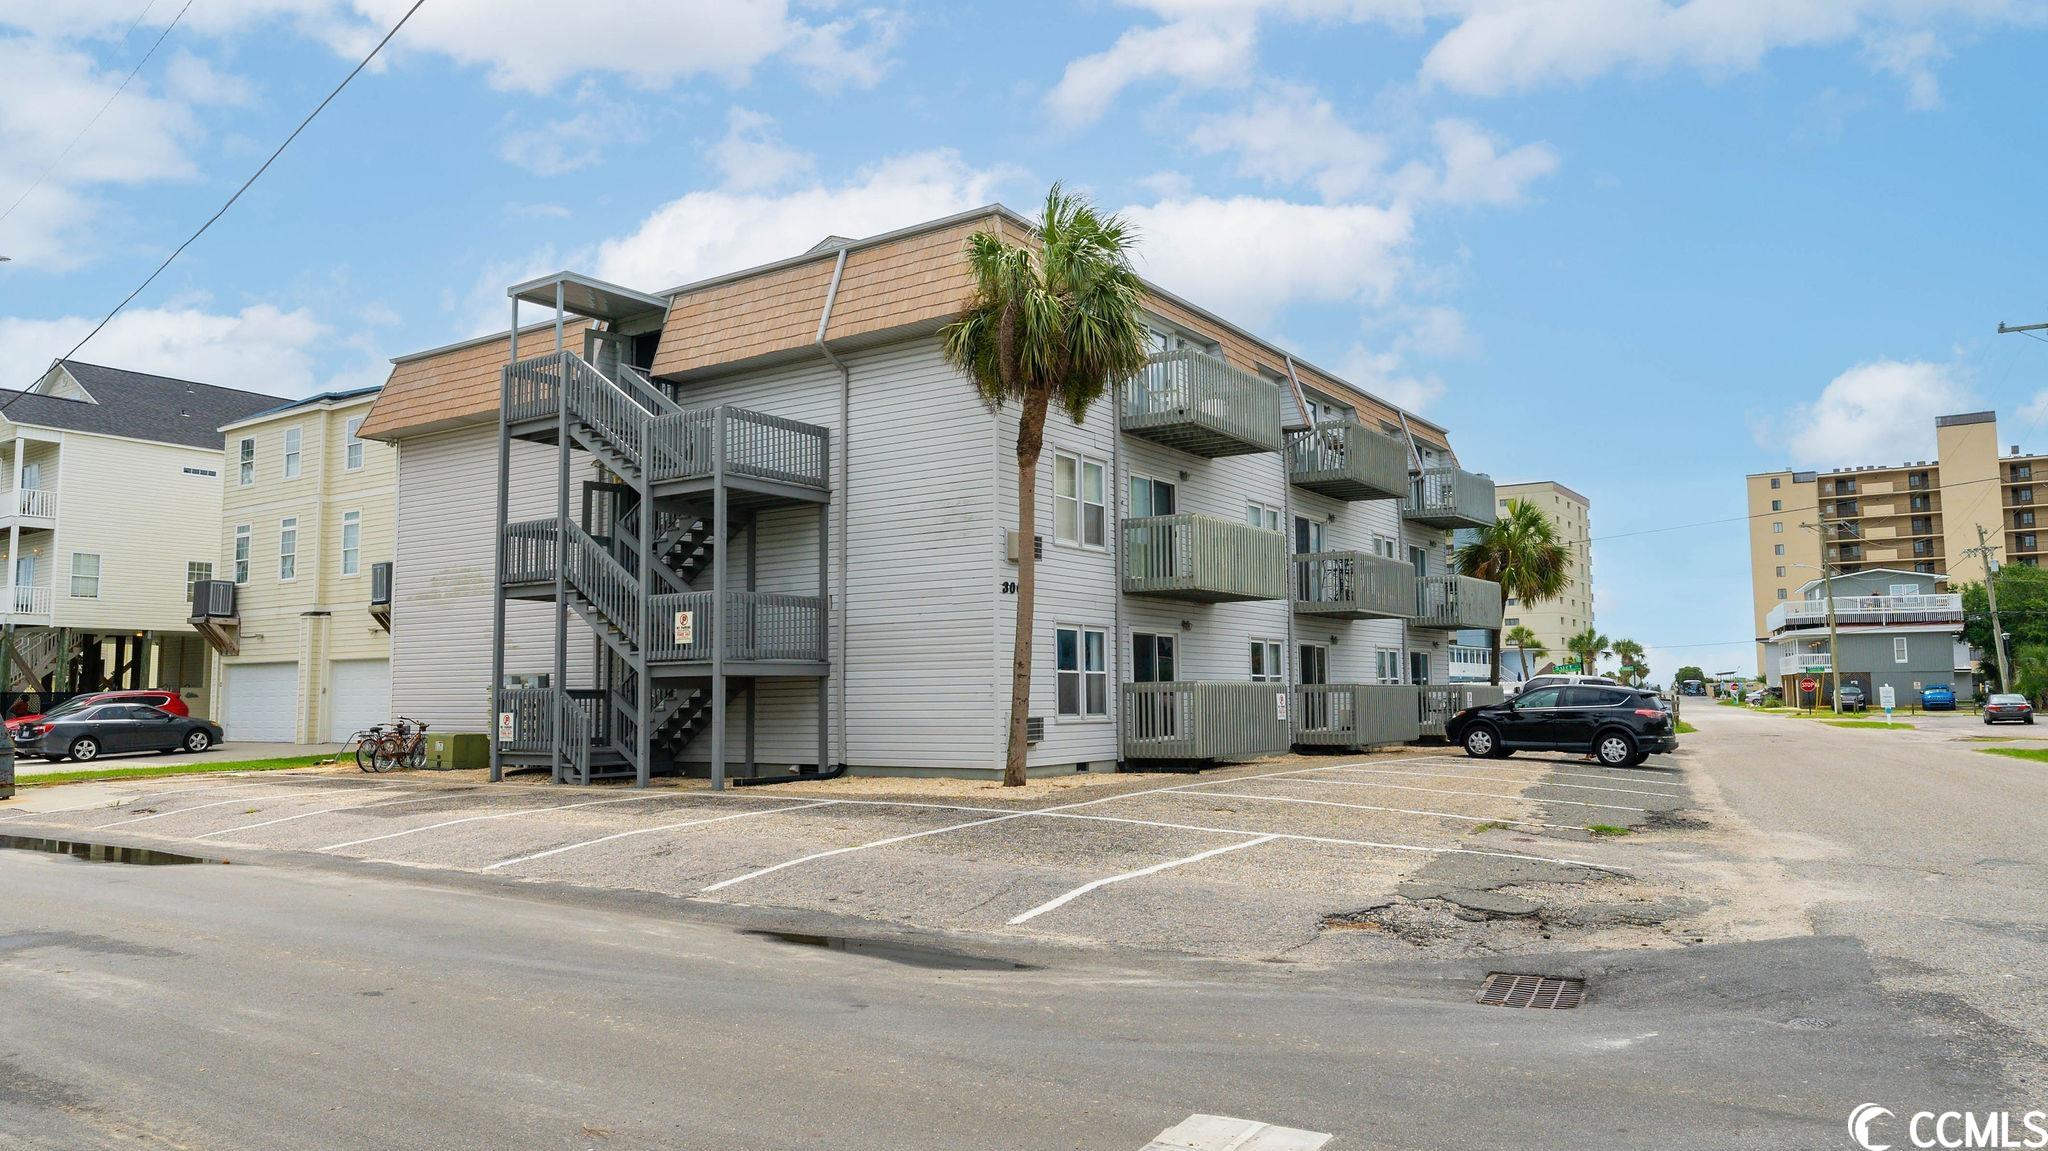 300 47th Ave. S UNIT 2-F North Myrtle Beach, SC 29582